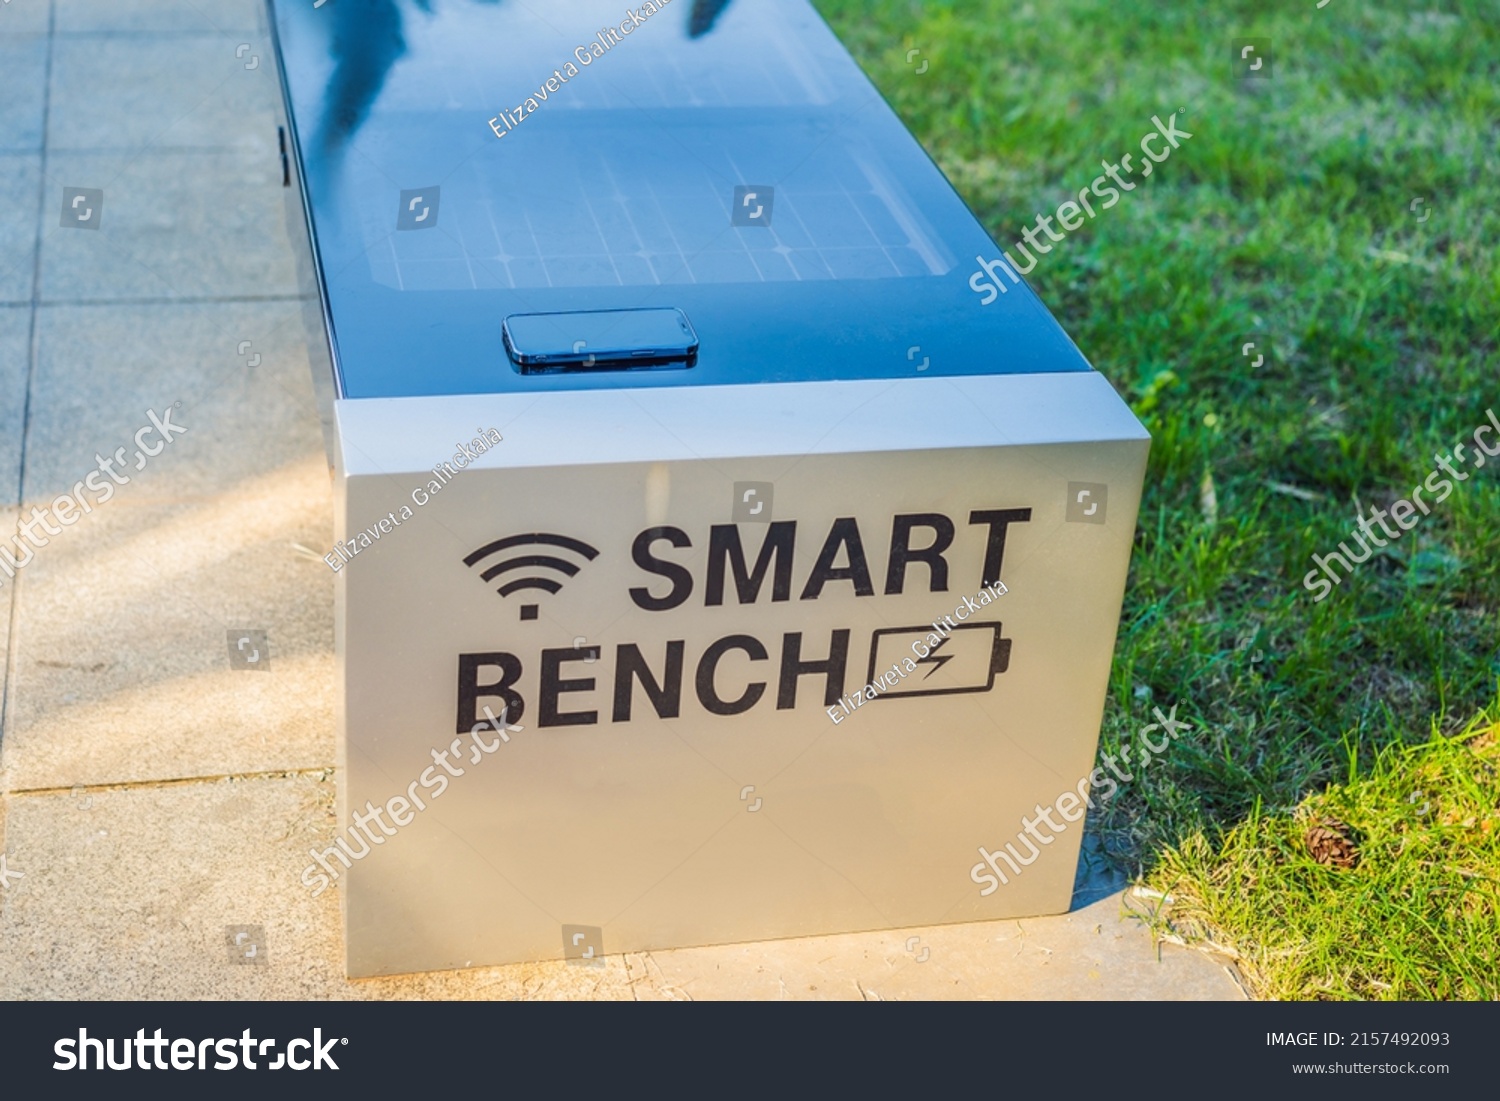 New smart bench in local public park used for charging mobile phones while providing wireless network #2157492093